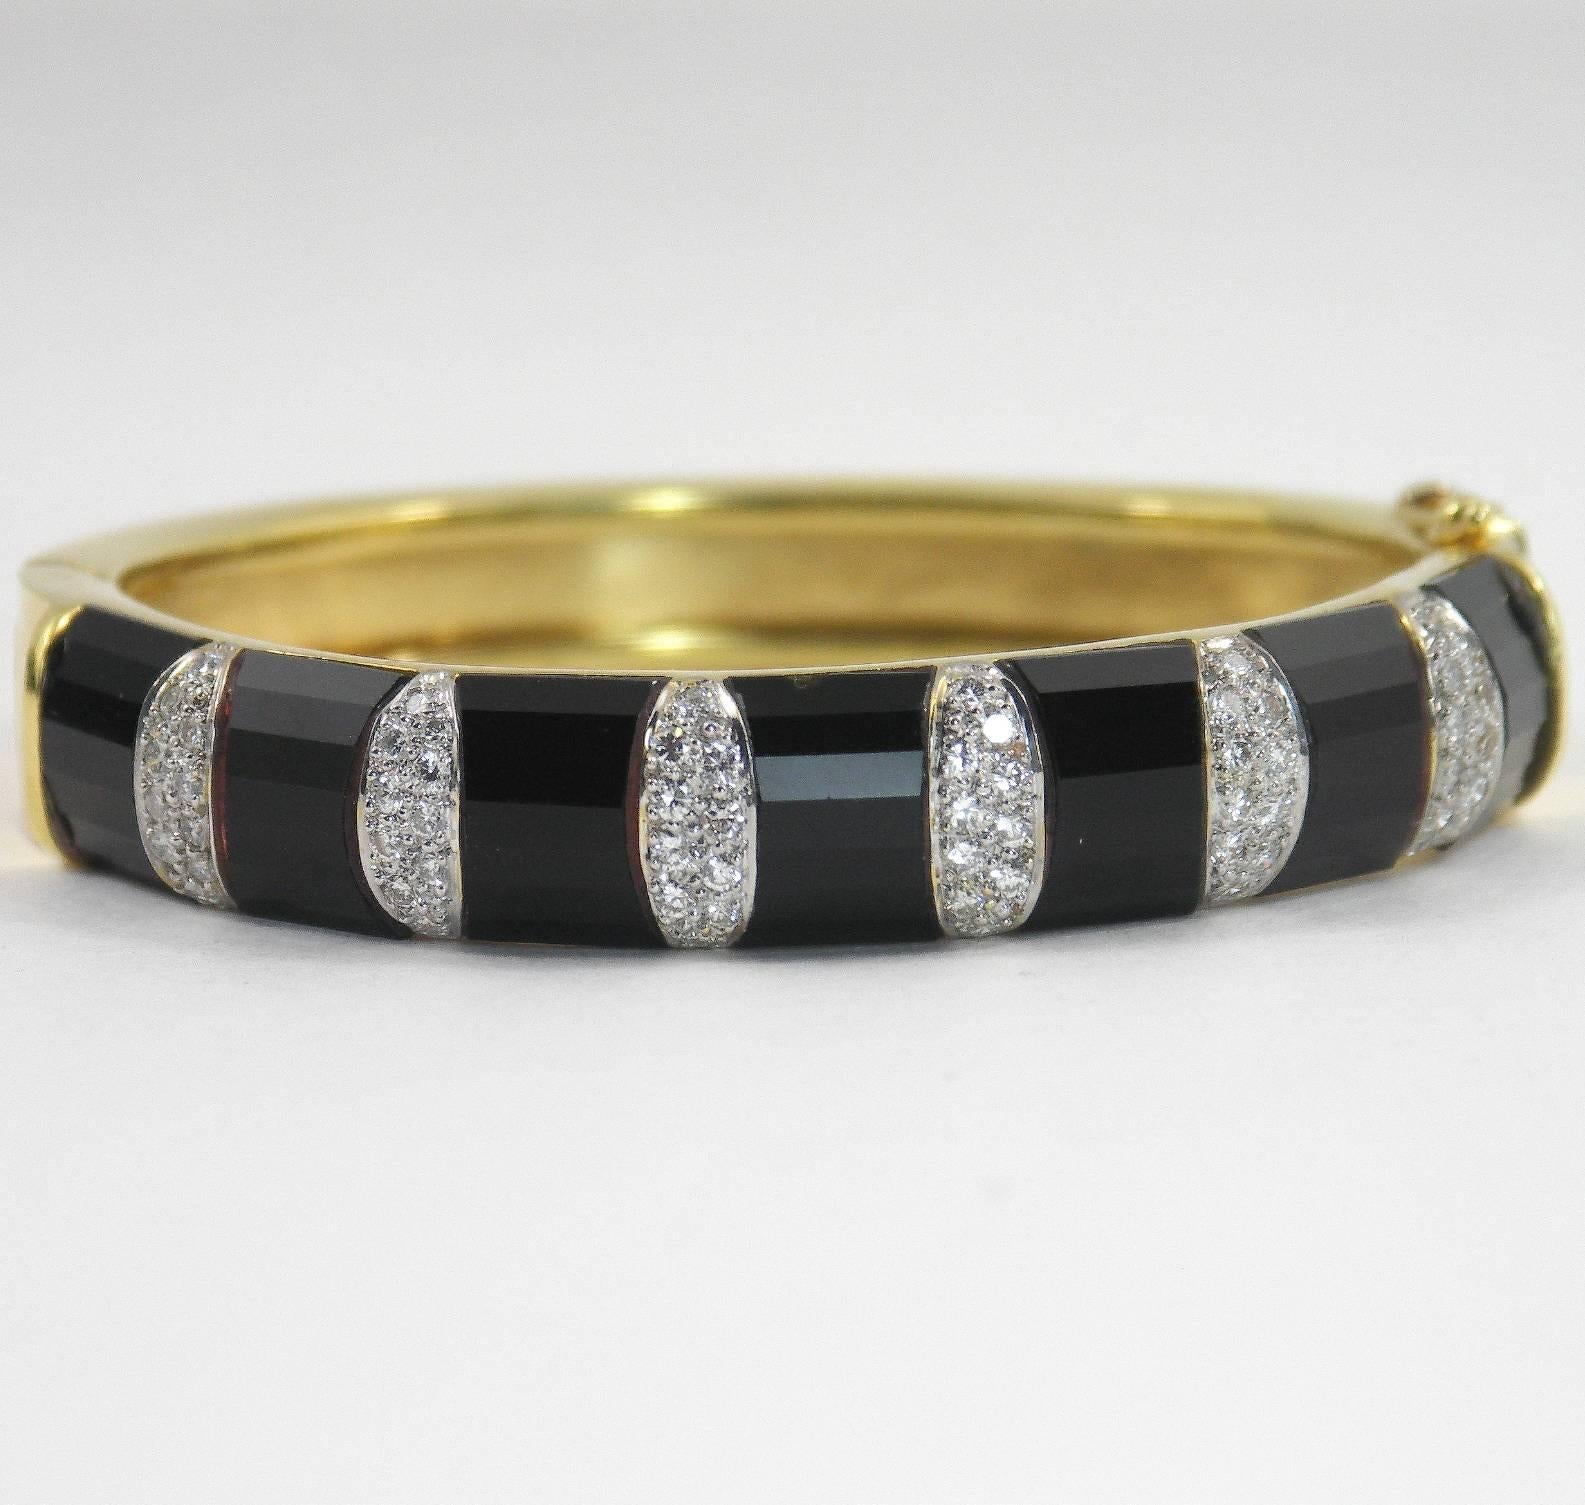 An 18K yellow gold bracelet set with seven onyx slabs, and six pave' diamond sections. Measuring 1/2 an inch wide, the diamonds weigh 1.25ct total approximate weight, and are of overall F/G color, and VS1 clarity. 
Inside circumference is 6 1/2